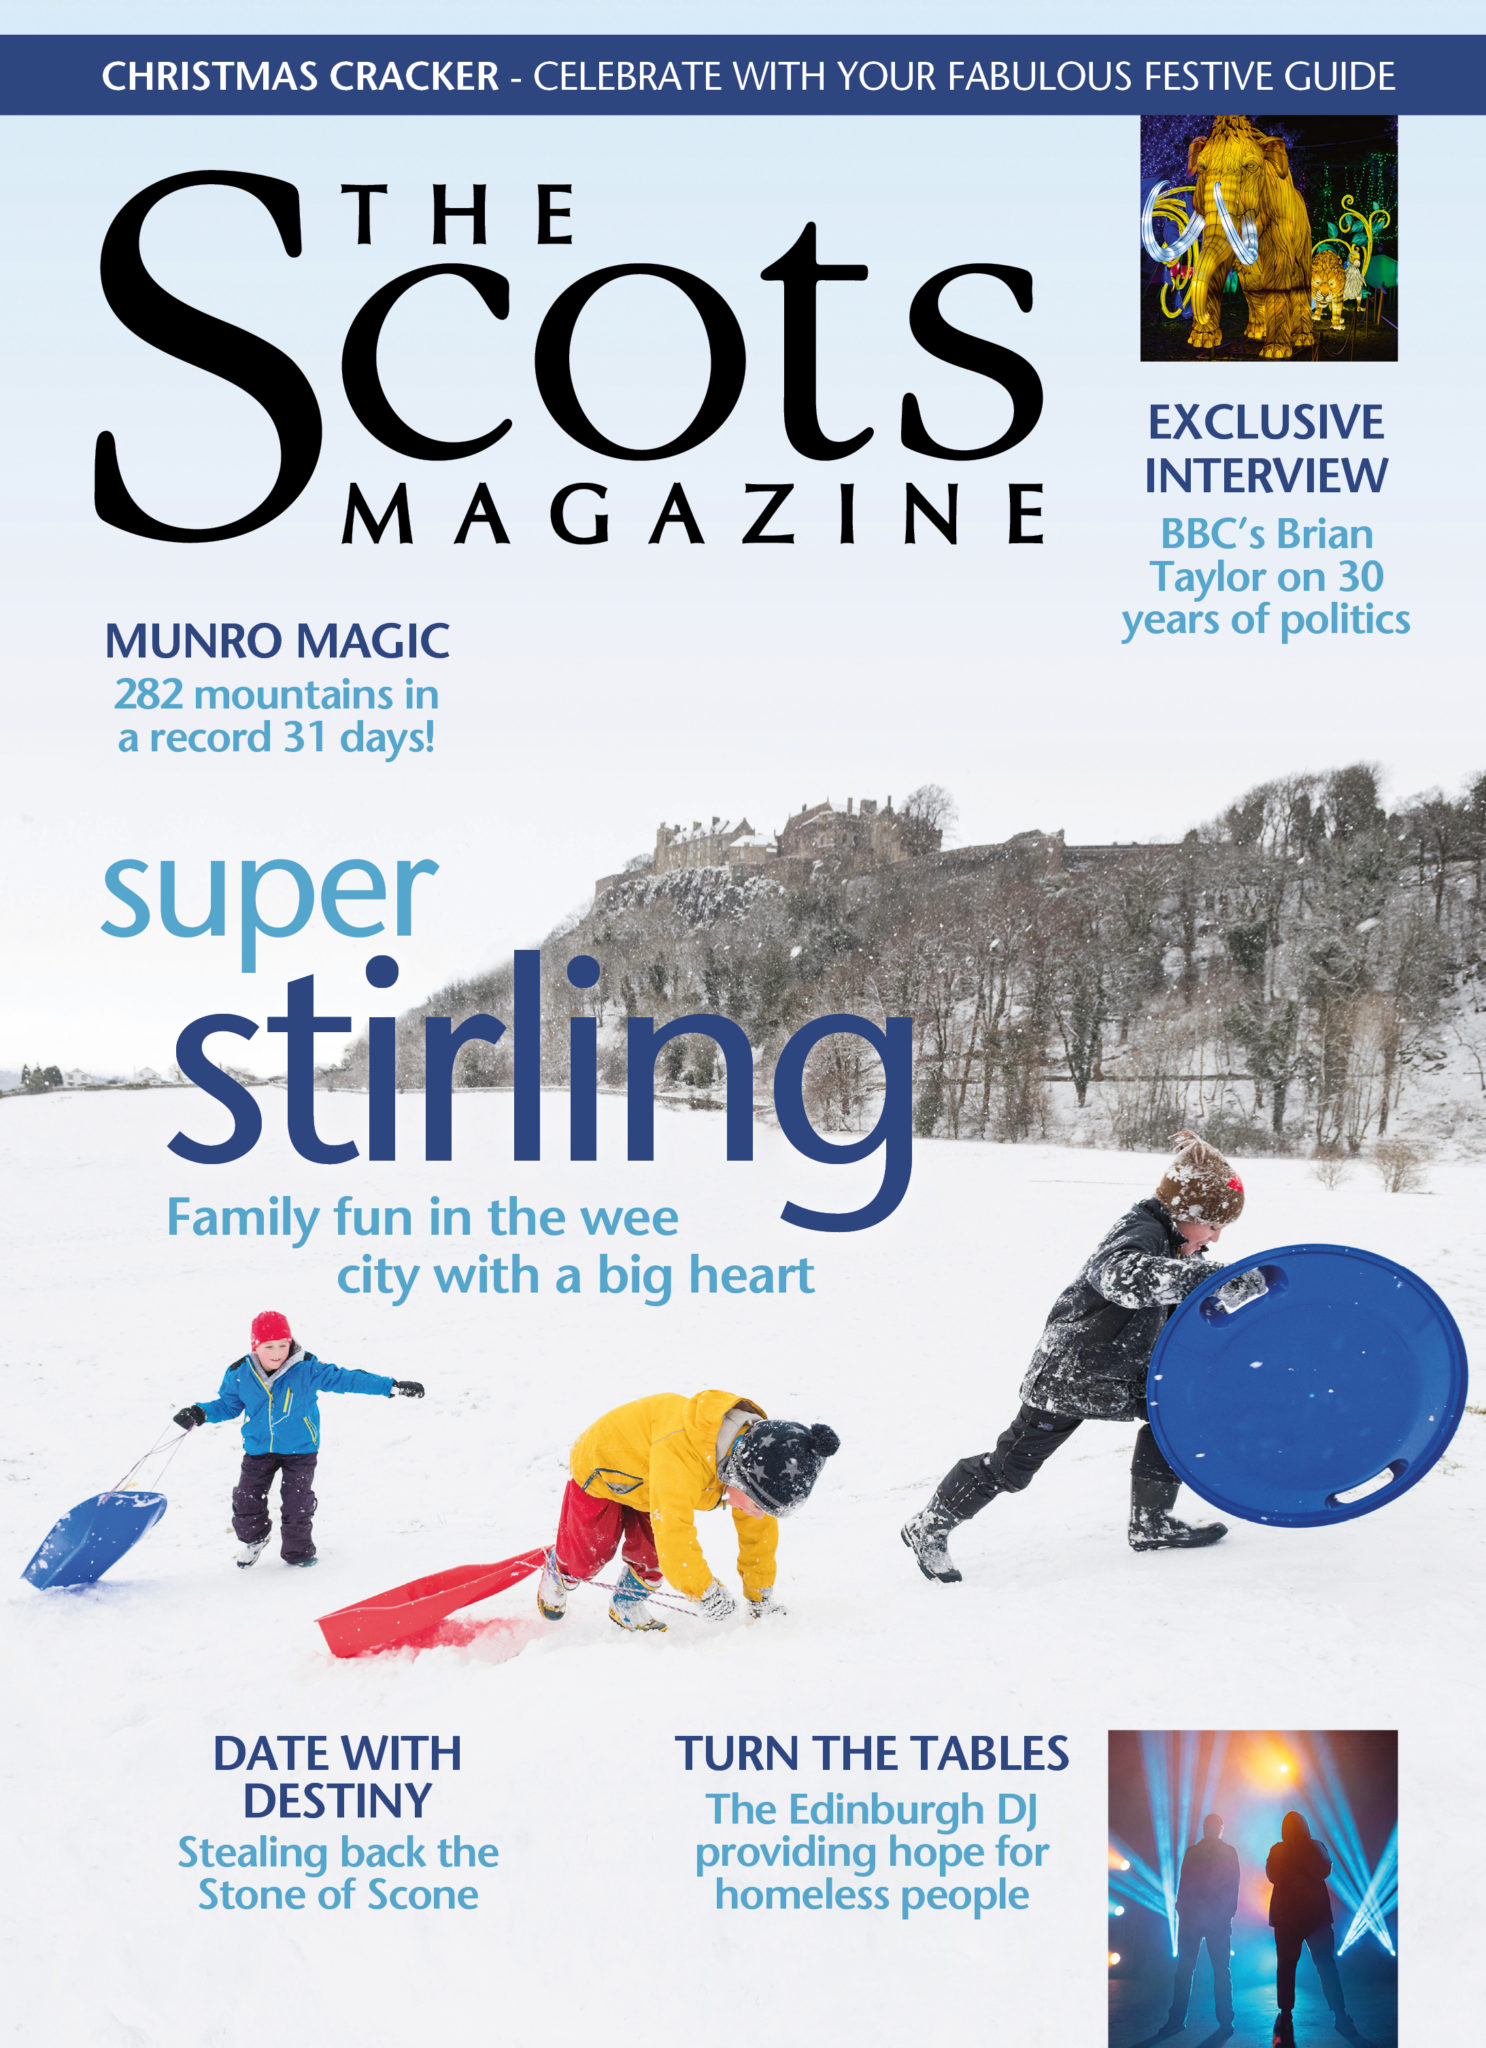 The Scots Magazine December 2020 Issue Is In Shops Now!